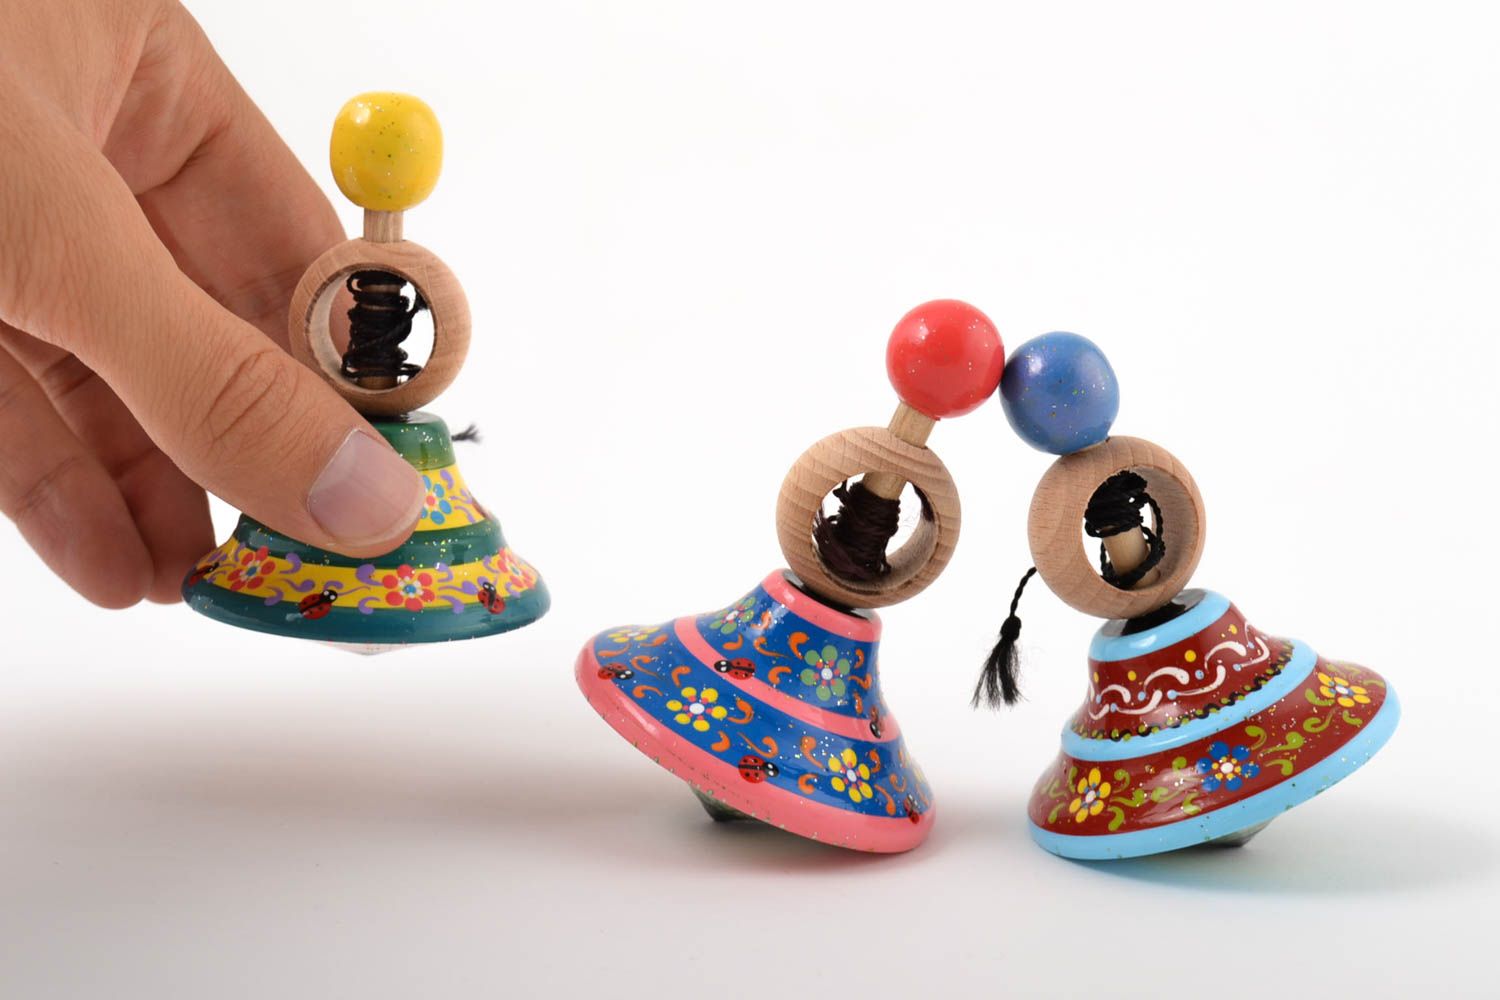 Handmade wooden toy spinning top toy spin toy top best gifts for kids photo 5